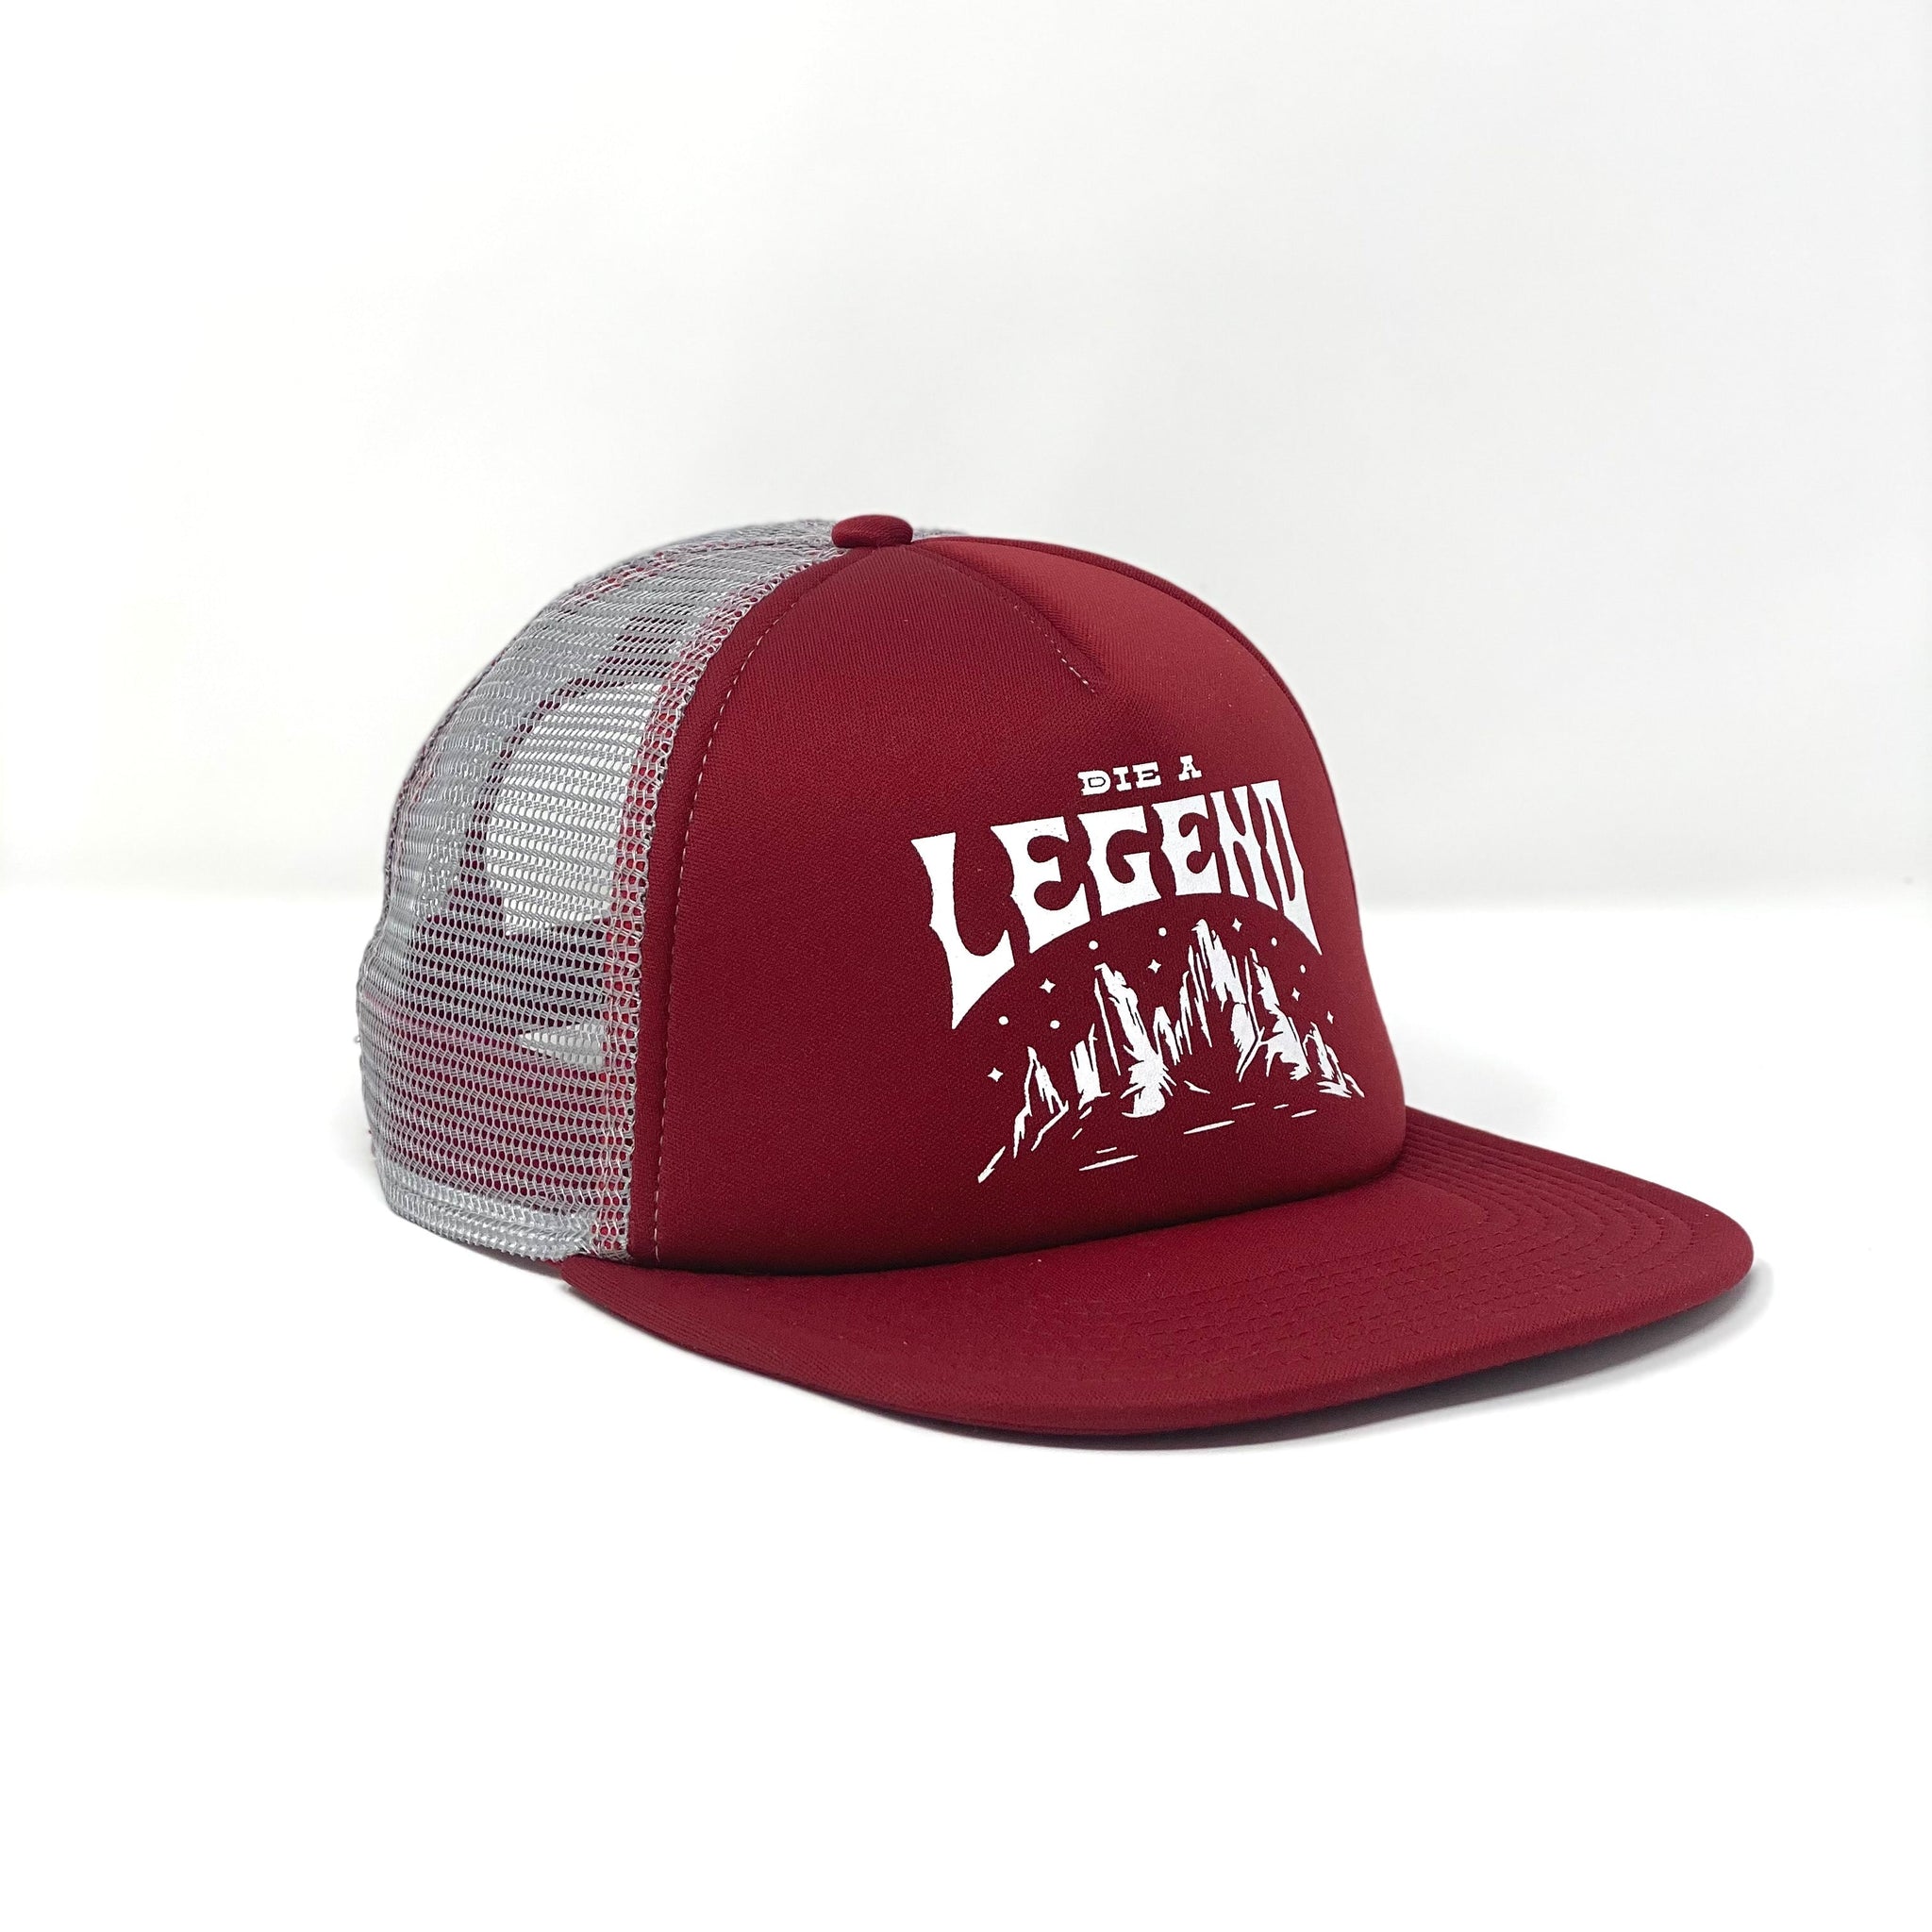 The Die a Legend Hat